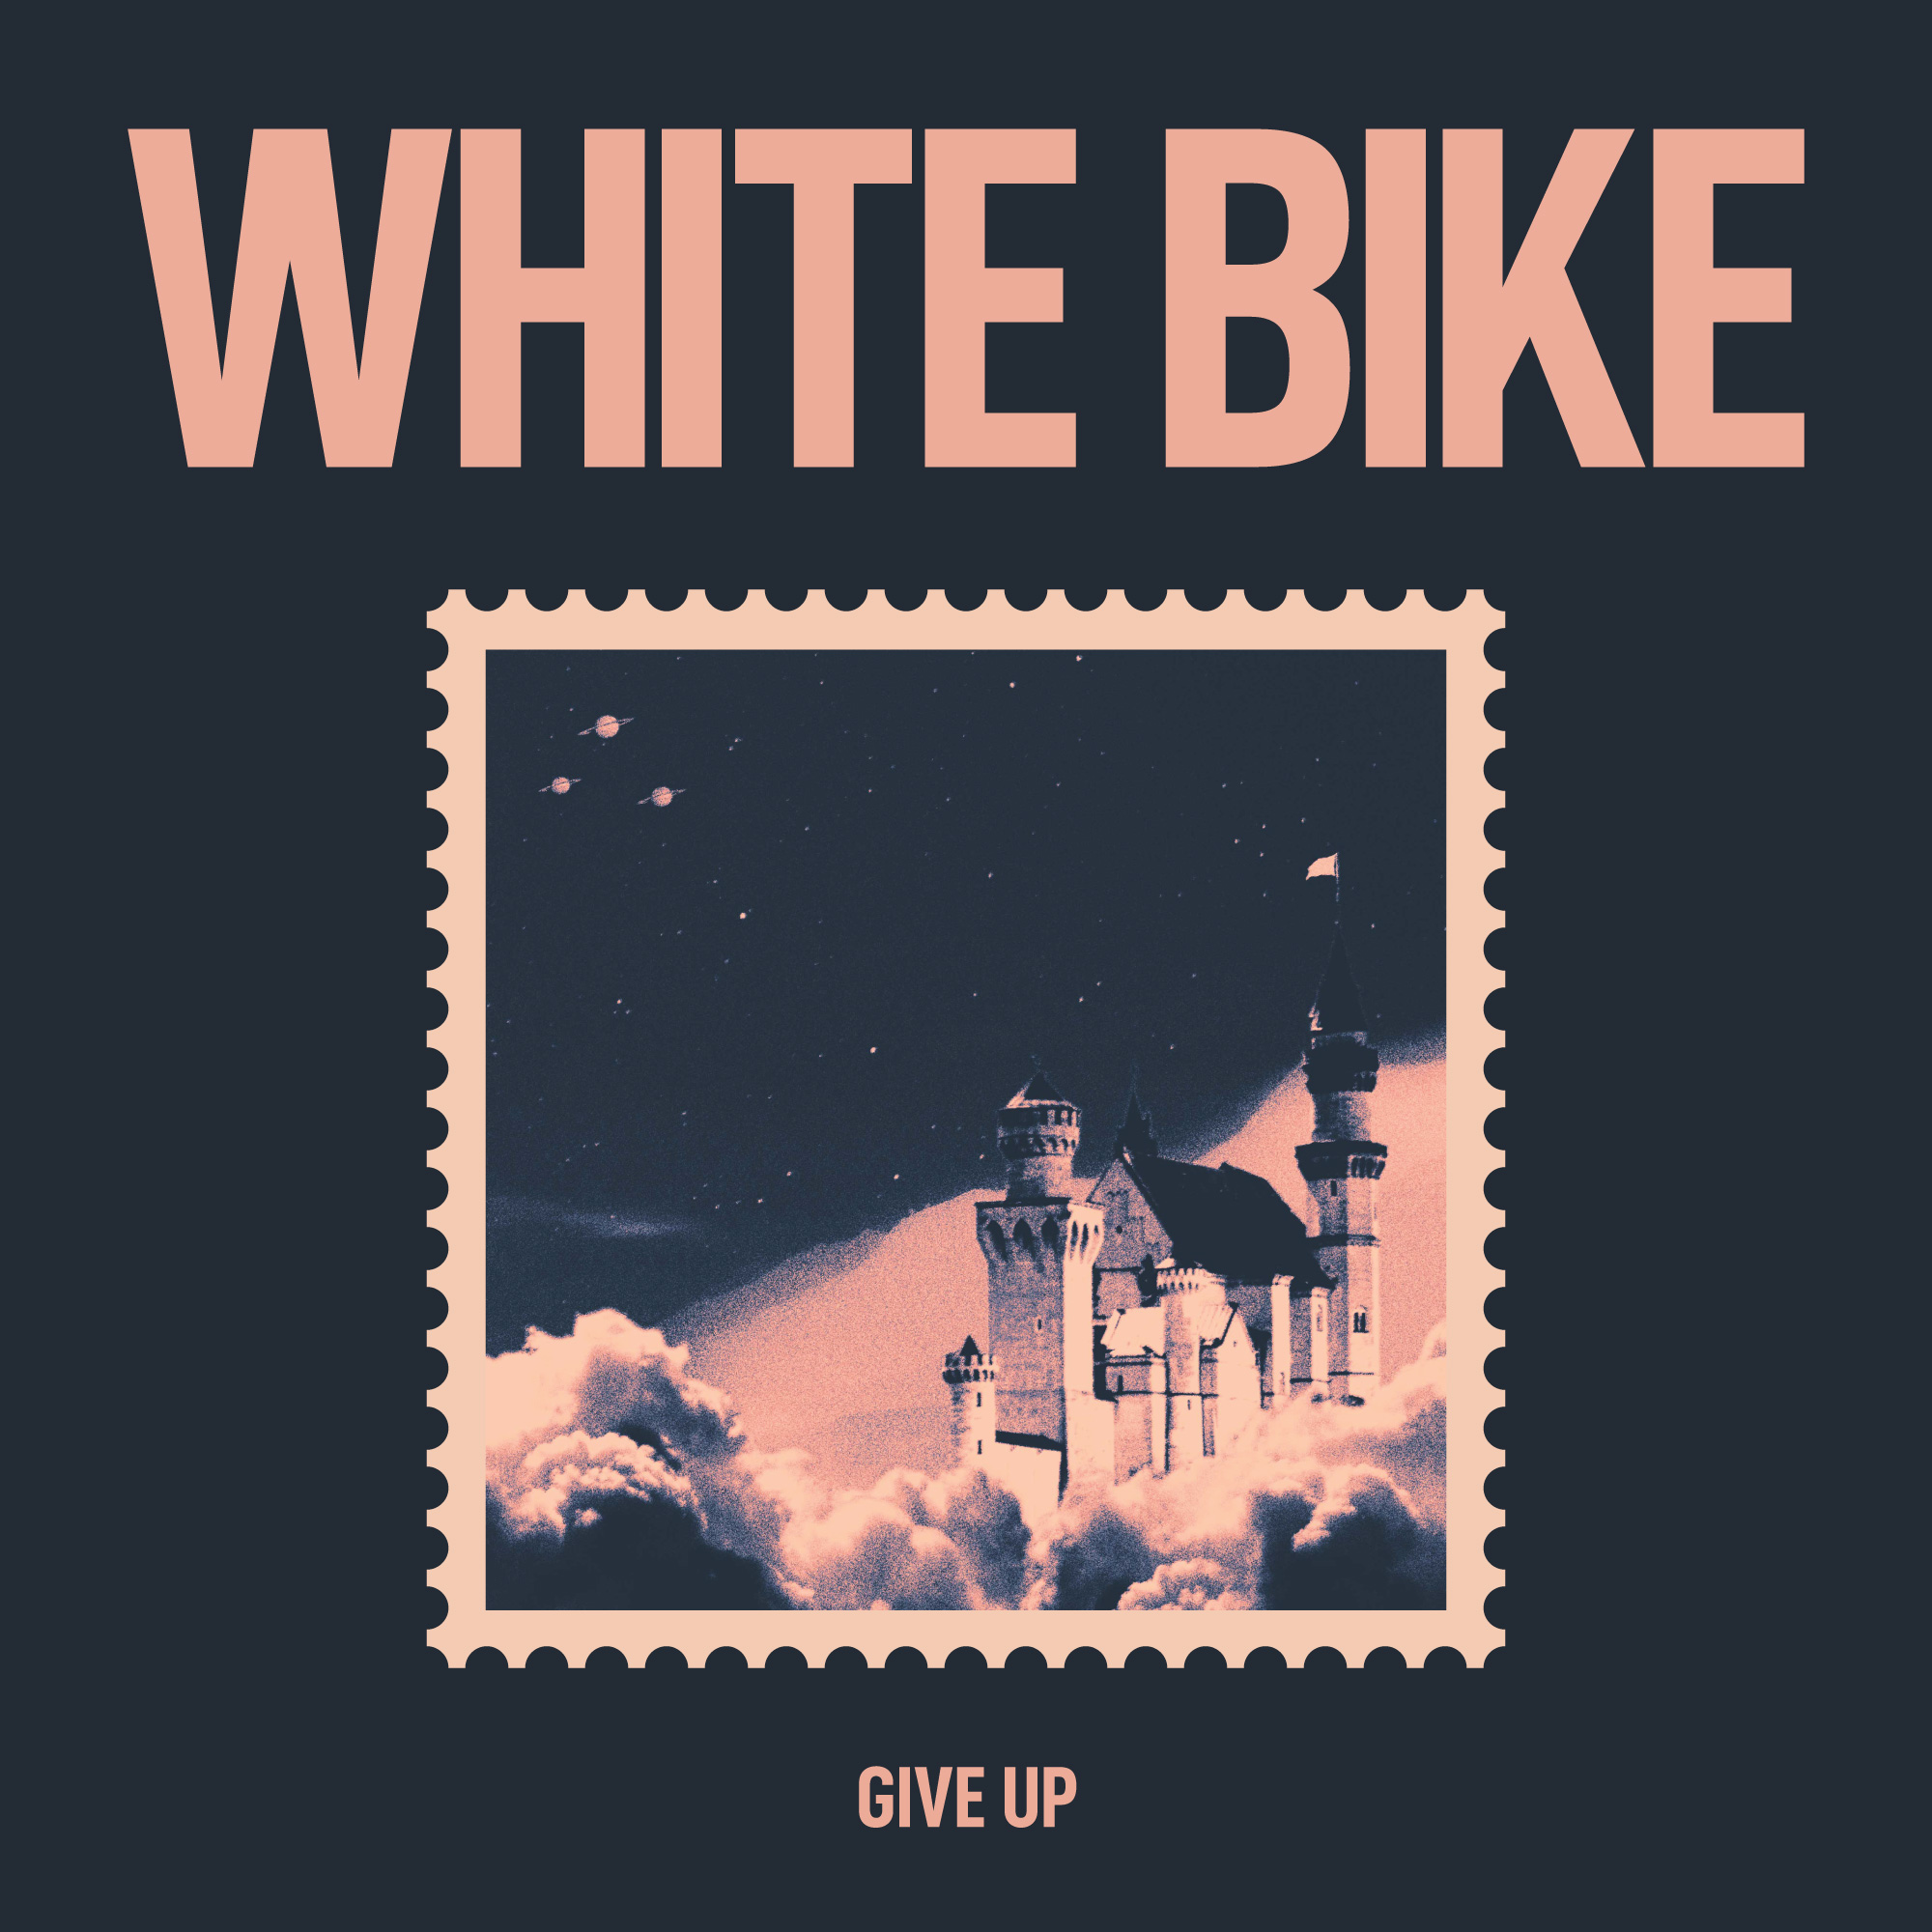 White Bike cover The Postal Service’s album Give Up for Turntable Kitchen’s vinyl cover subscription series rare vinyl exclusive